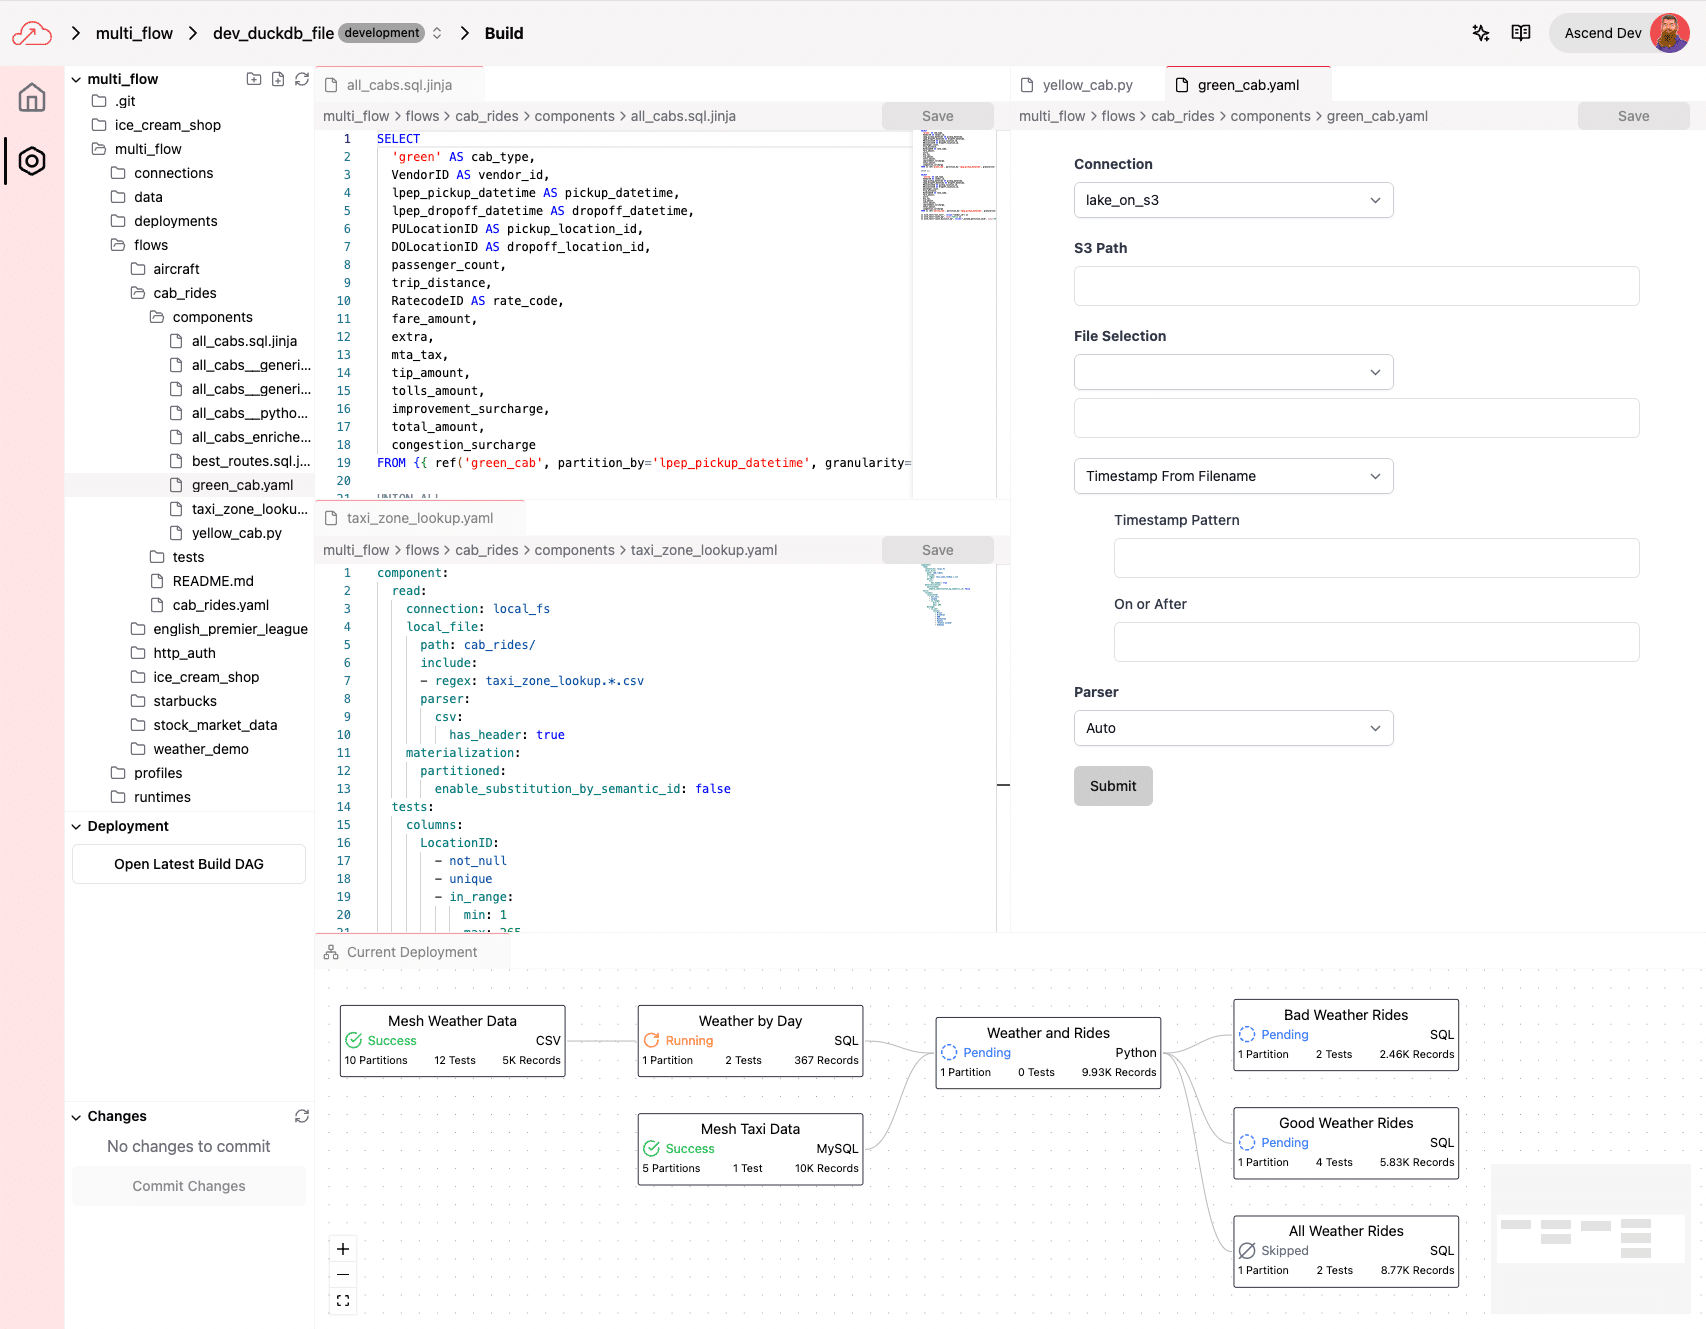 Ascend's Data Engineering Platform - A screenshot of the UI-based Developer Experience